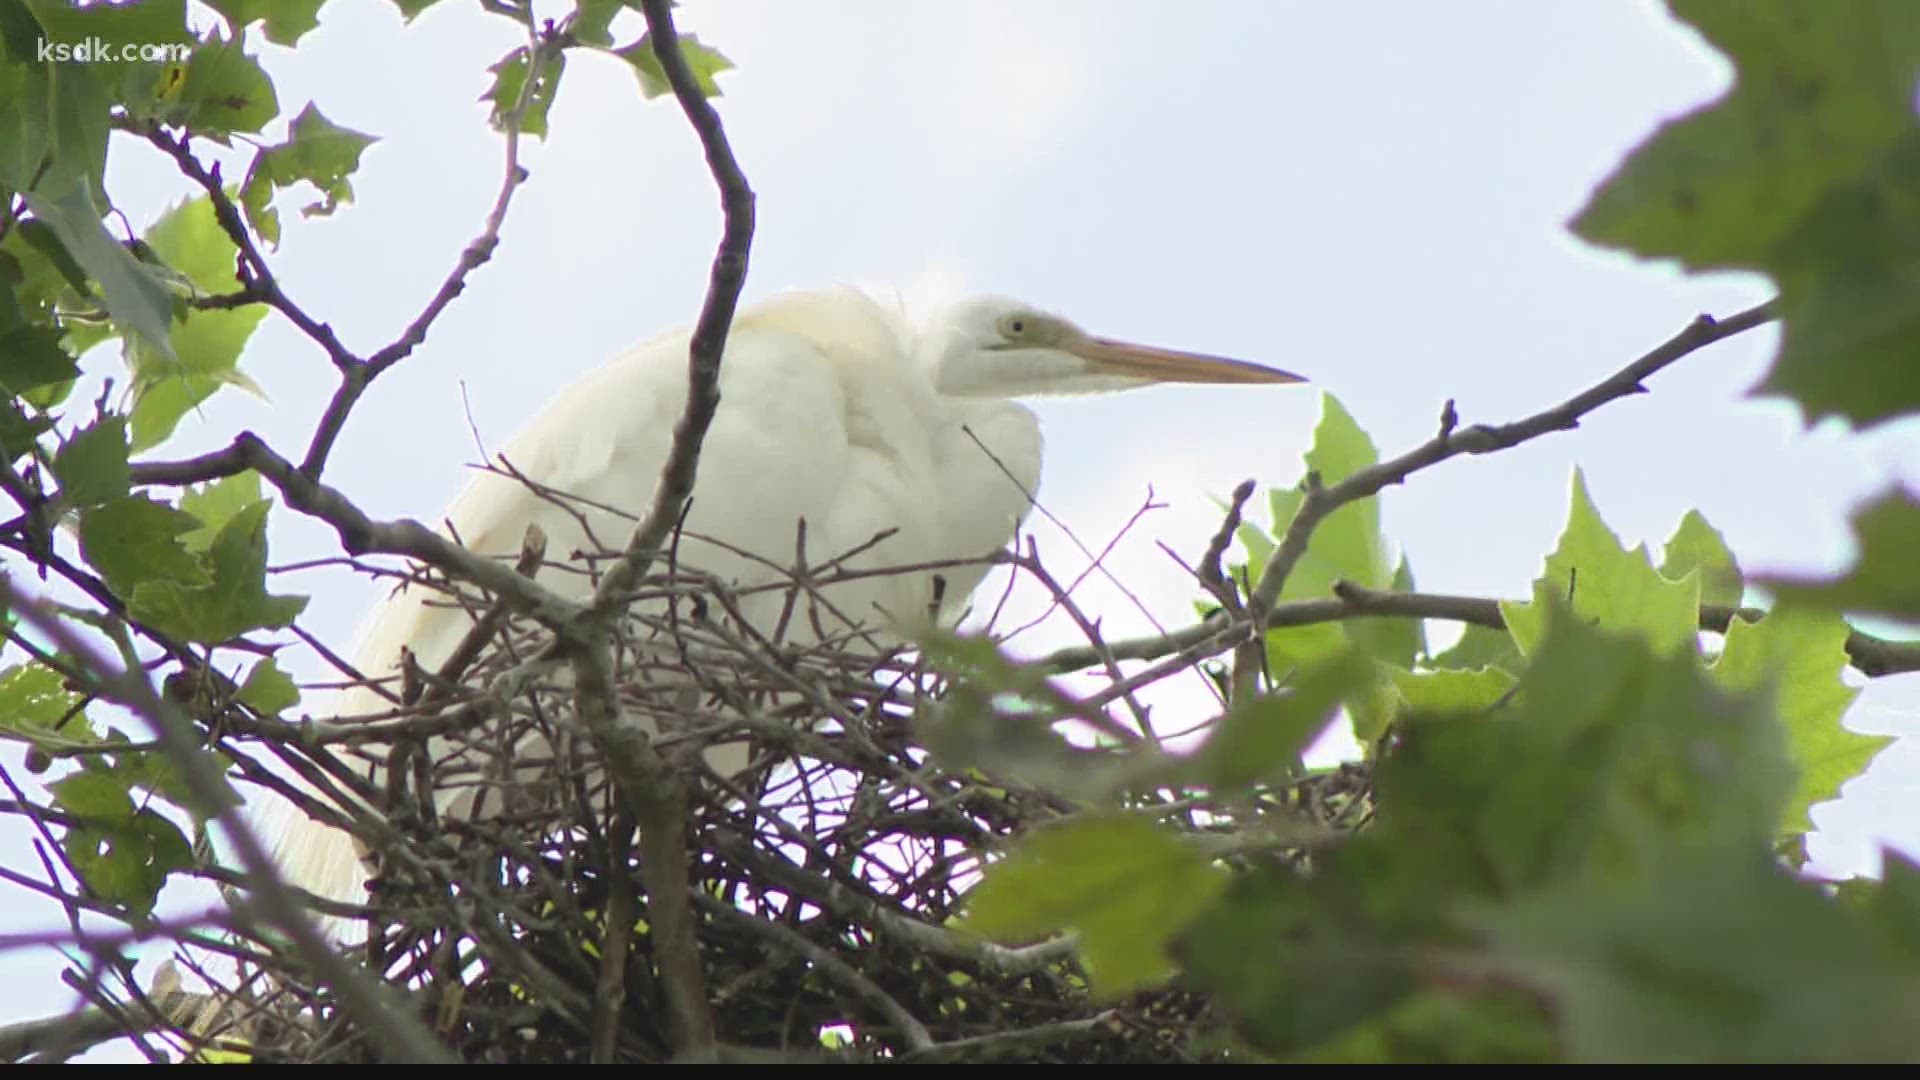 A rookery consisting of blue herons, night herons and two kinds of egrets have become an unexpected treat for bird watchers.